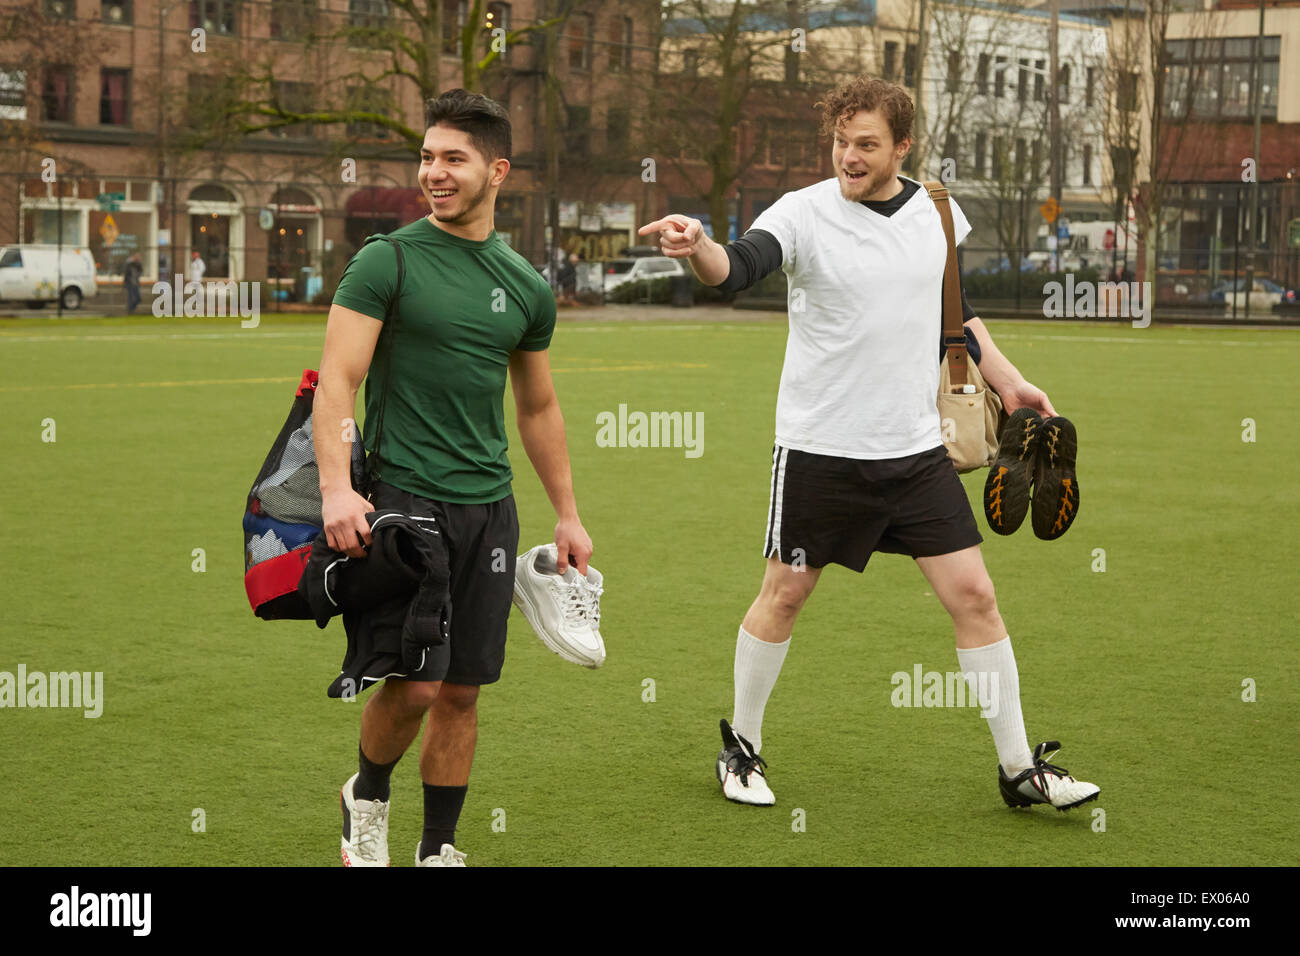 Two male soccer players carrying gym bags on soccer pitch Stock Photo